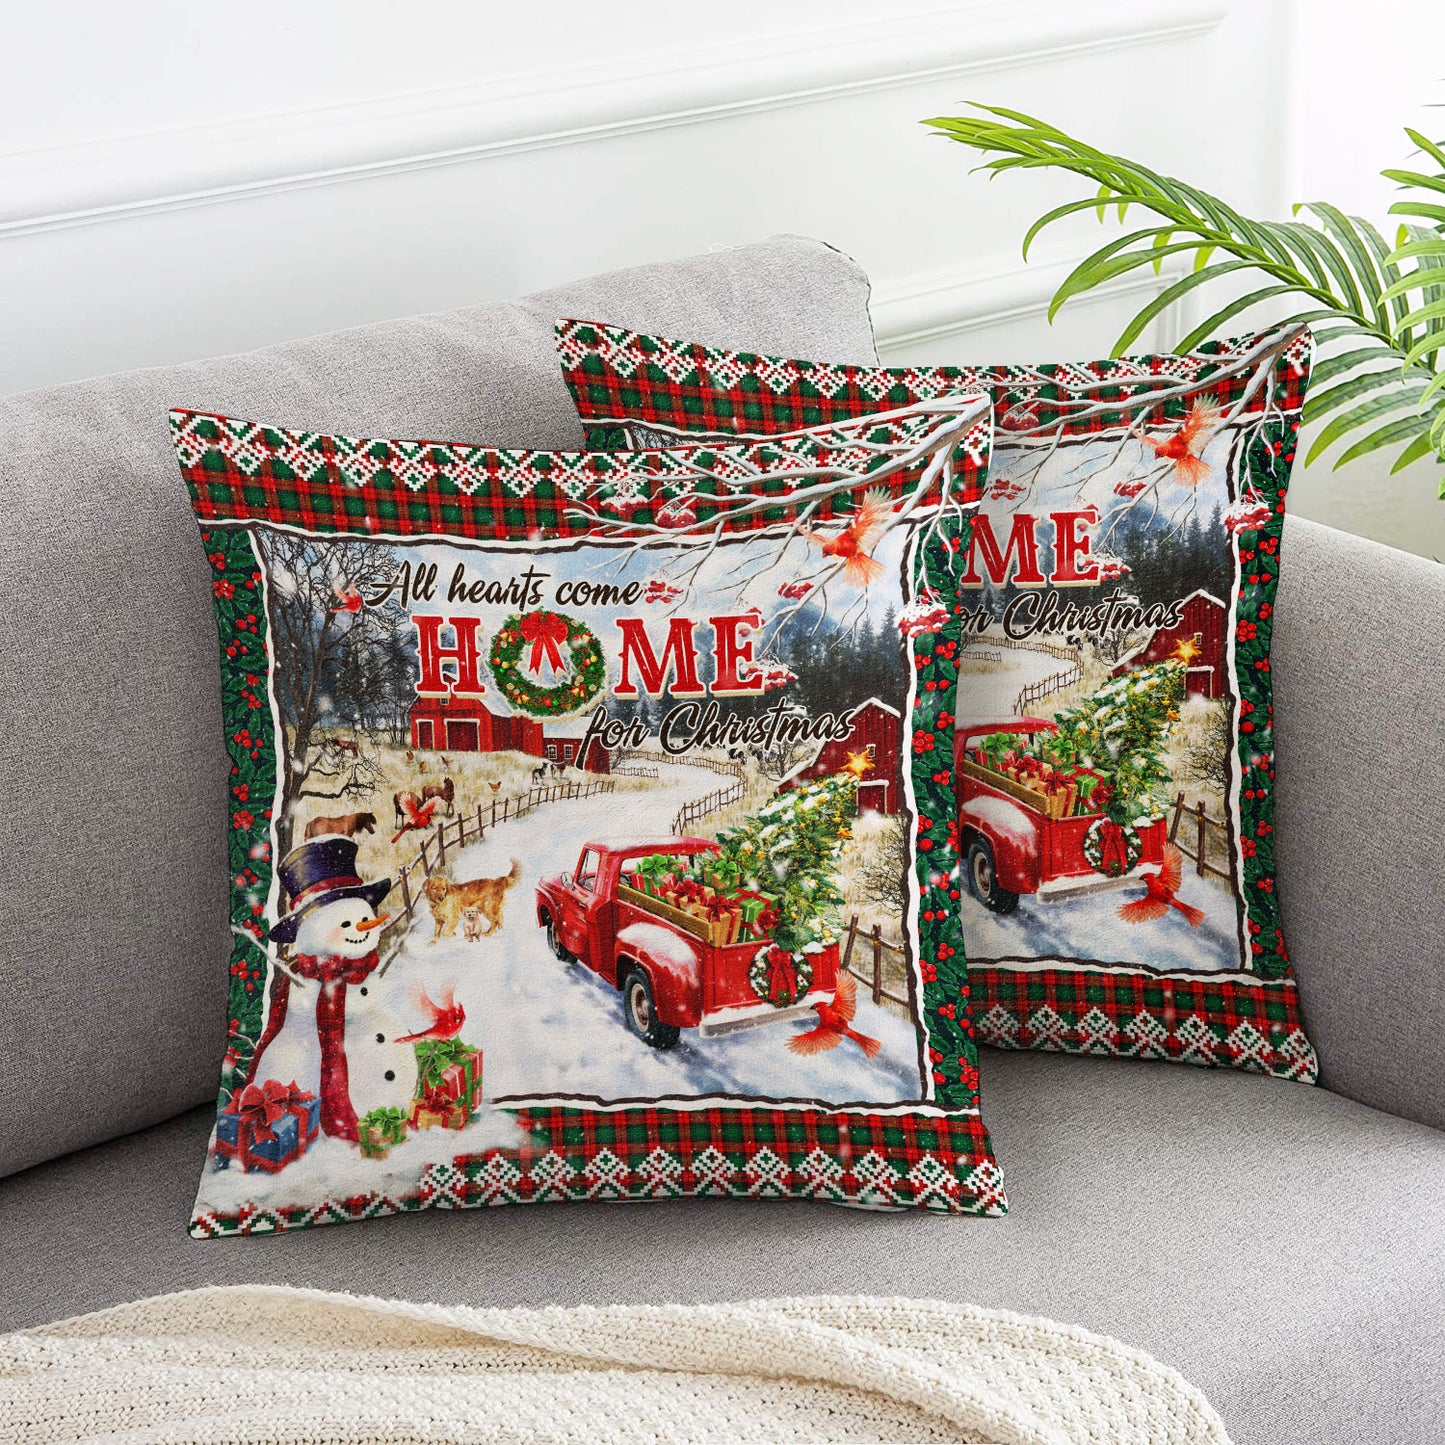 All Hearts Come Home For Christmas Snowman Throw Pillow Cover 2pcs